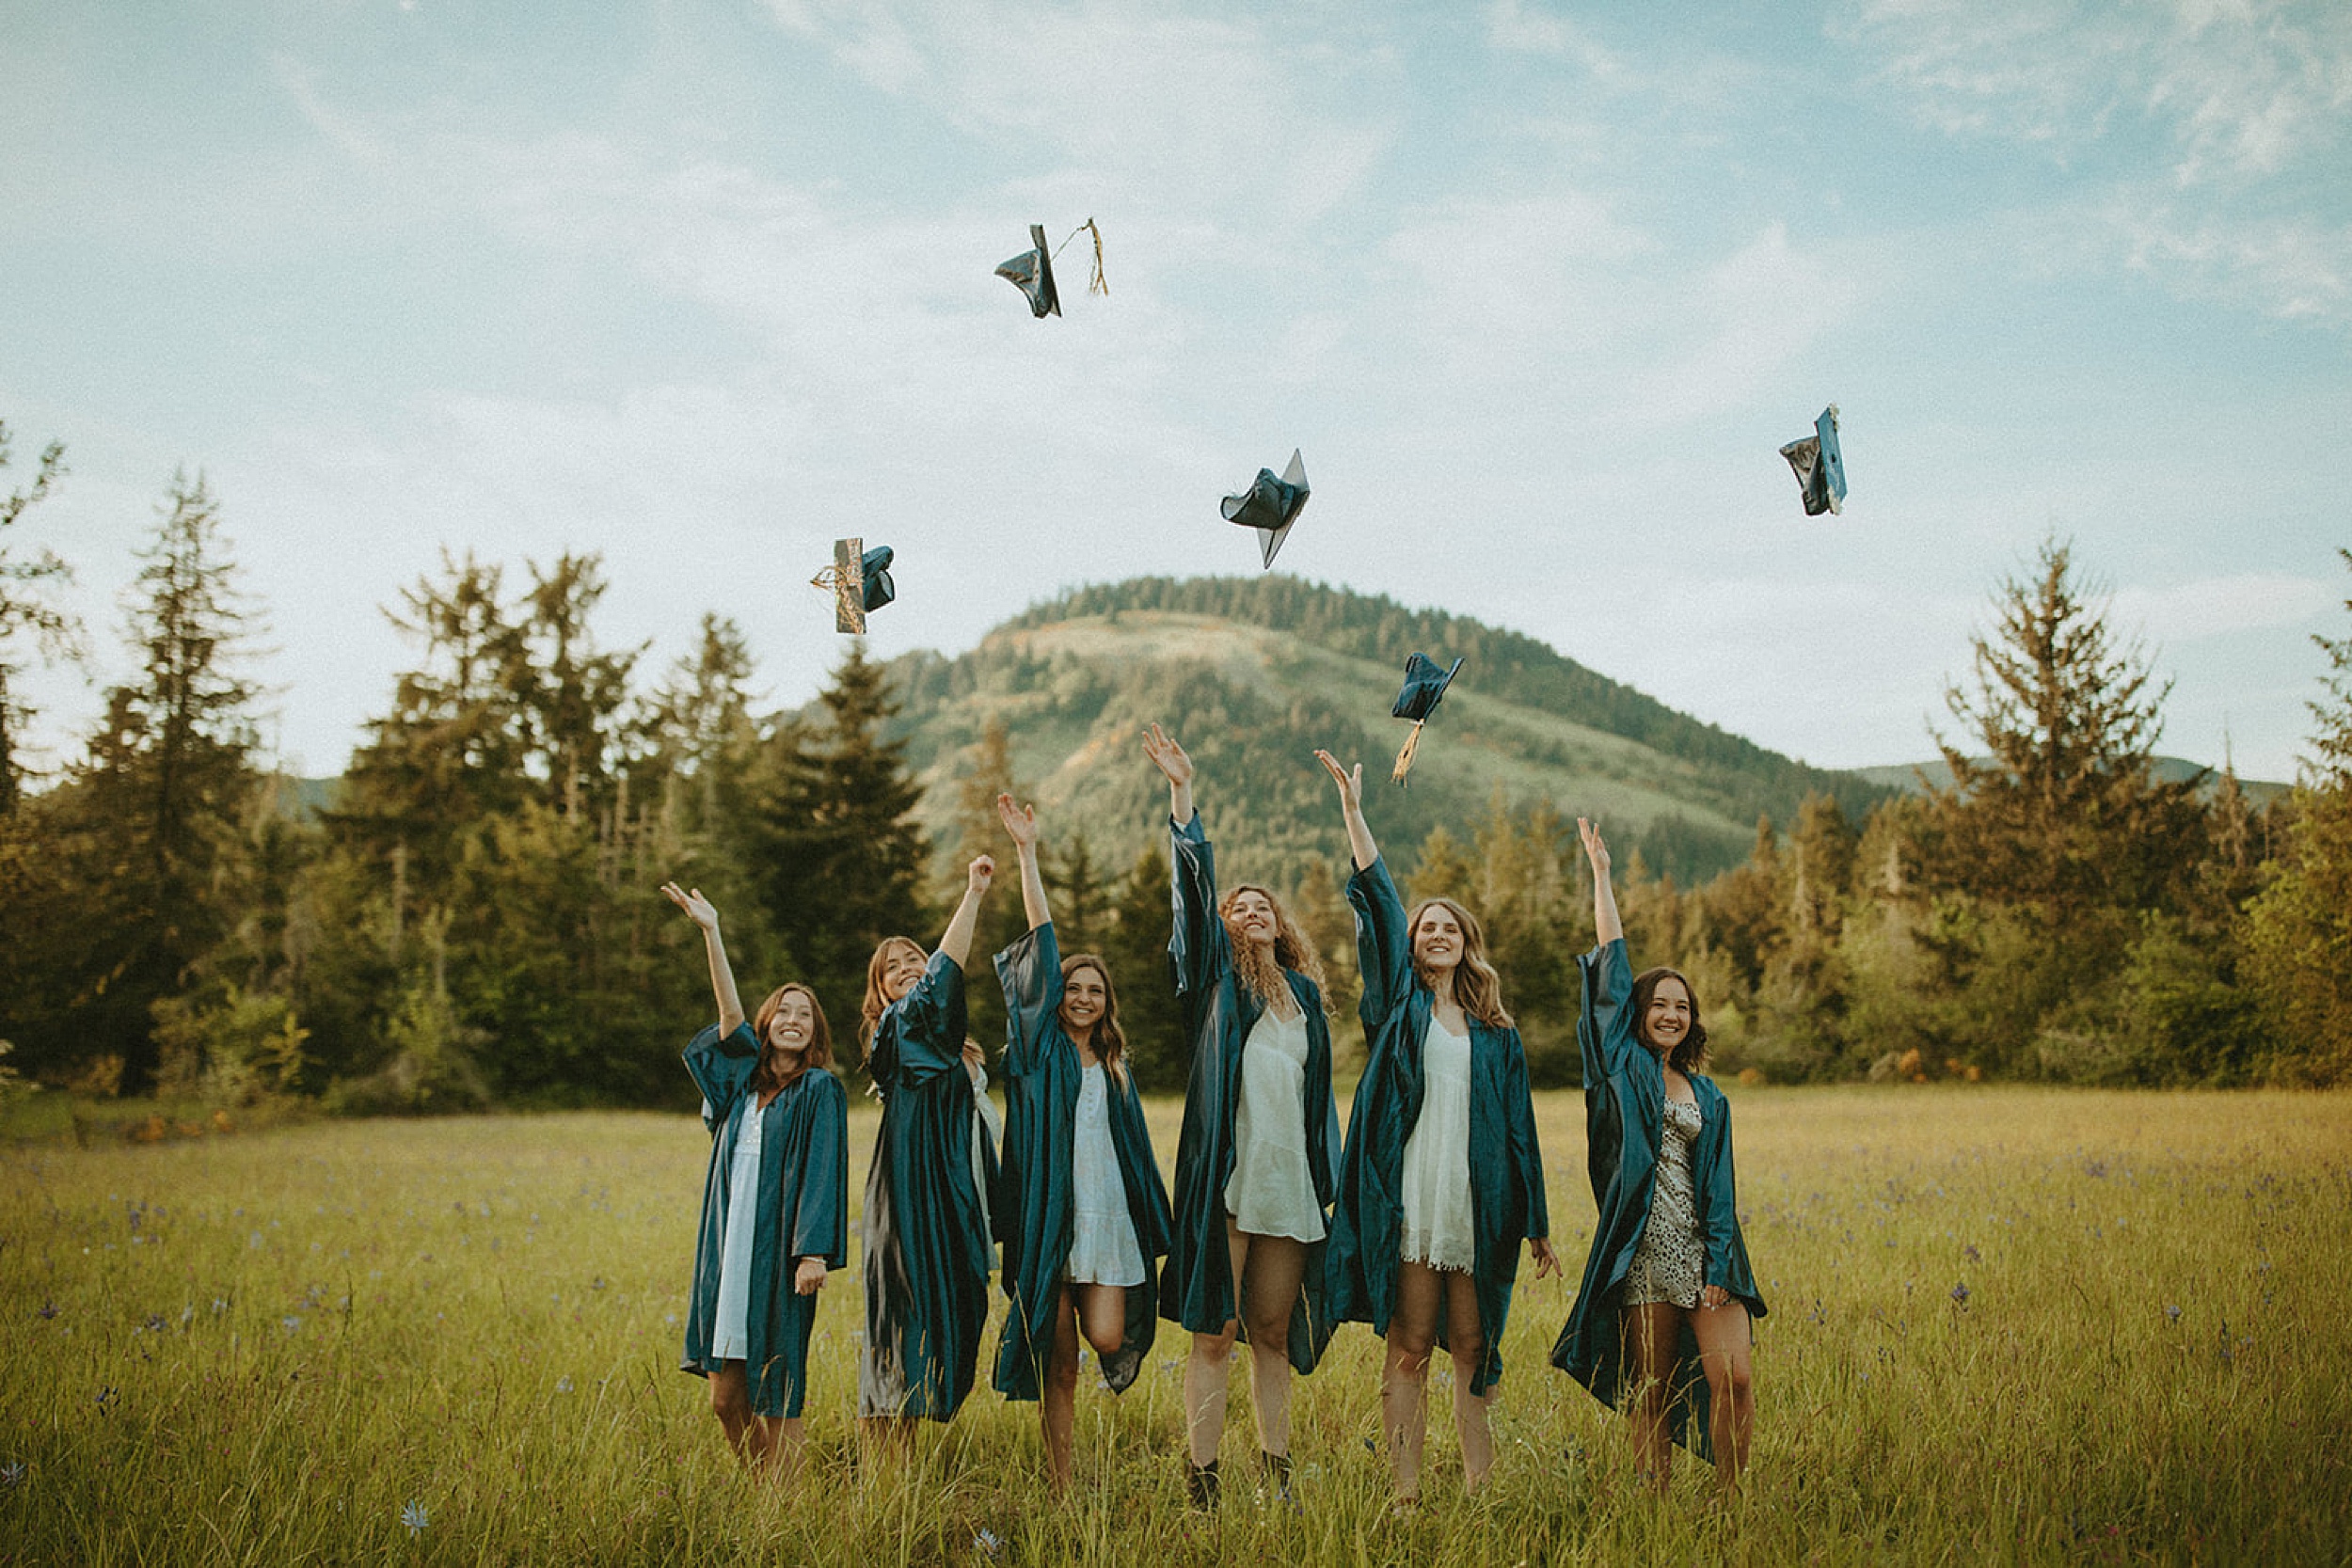 graduates standing in a field throwing caps